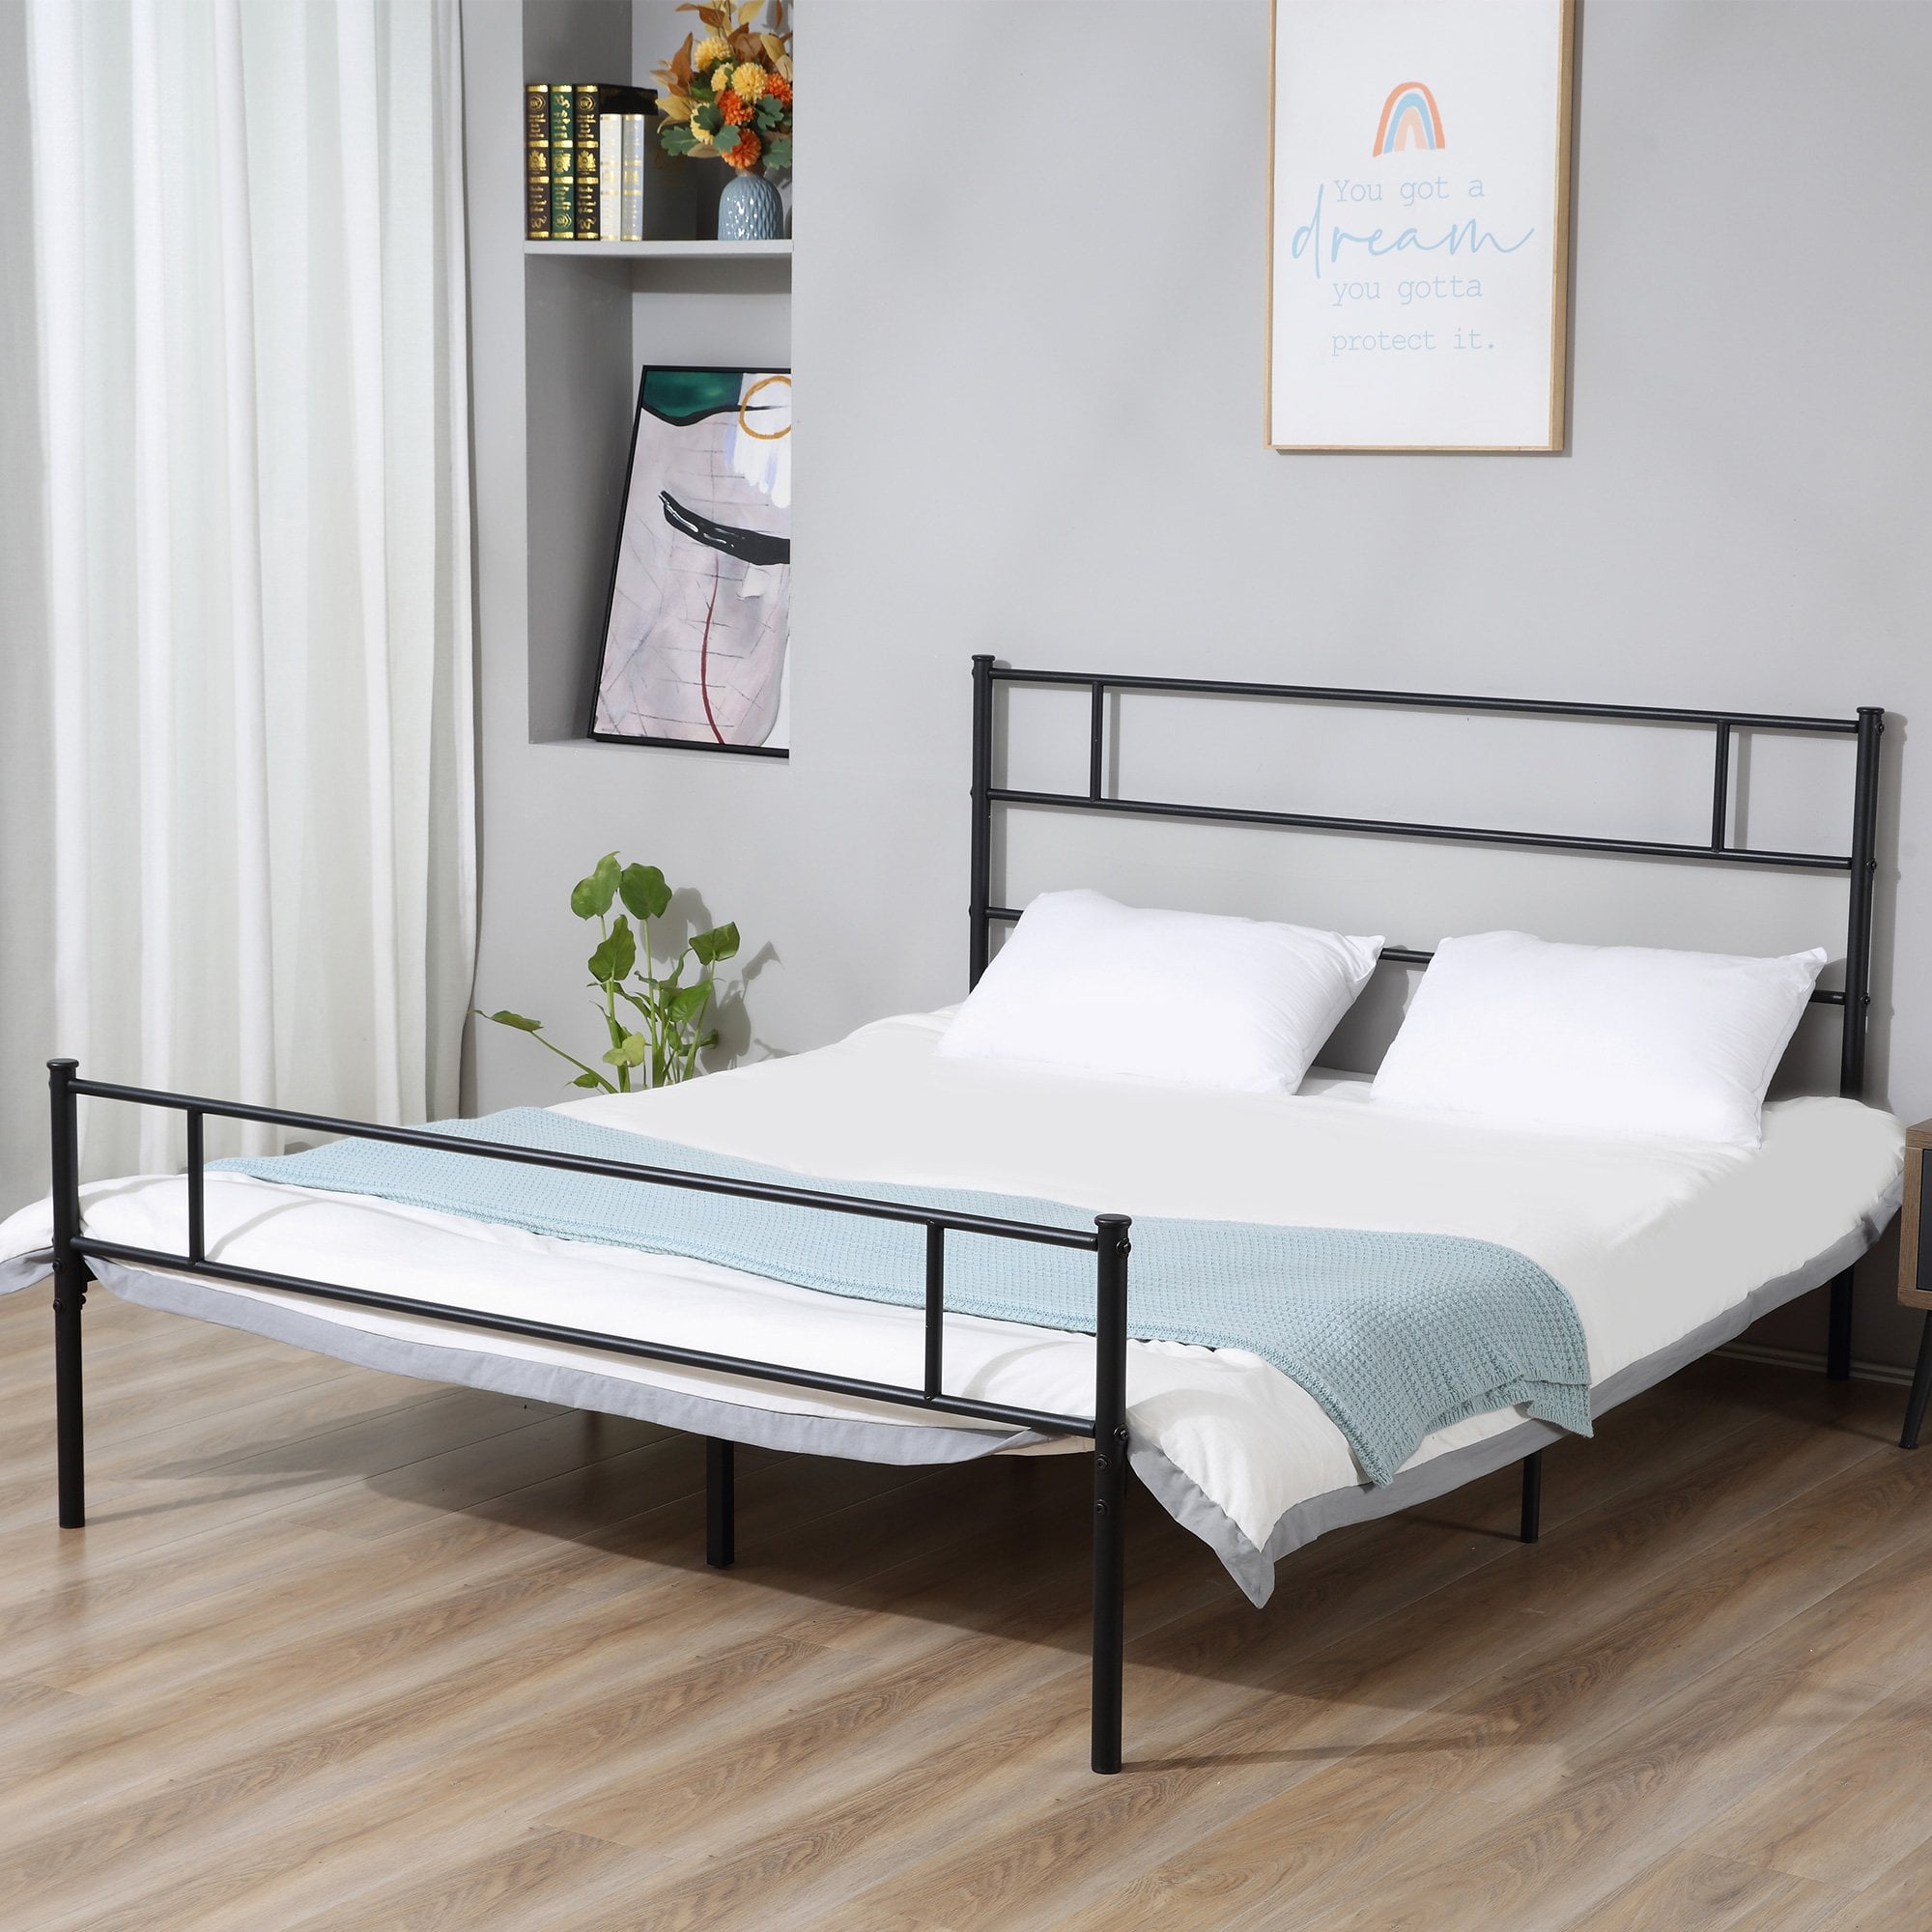 Double Metal Bed Frame Solid Bedstead Base with Headboard and Footboard - Metal Slat Support and Underbed Storage Space - Bedroom Furniture & - Home L